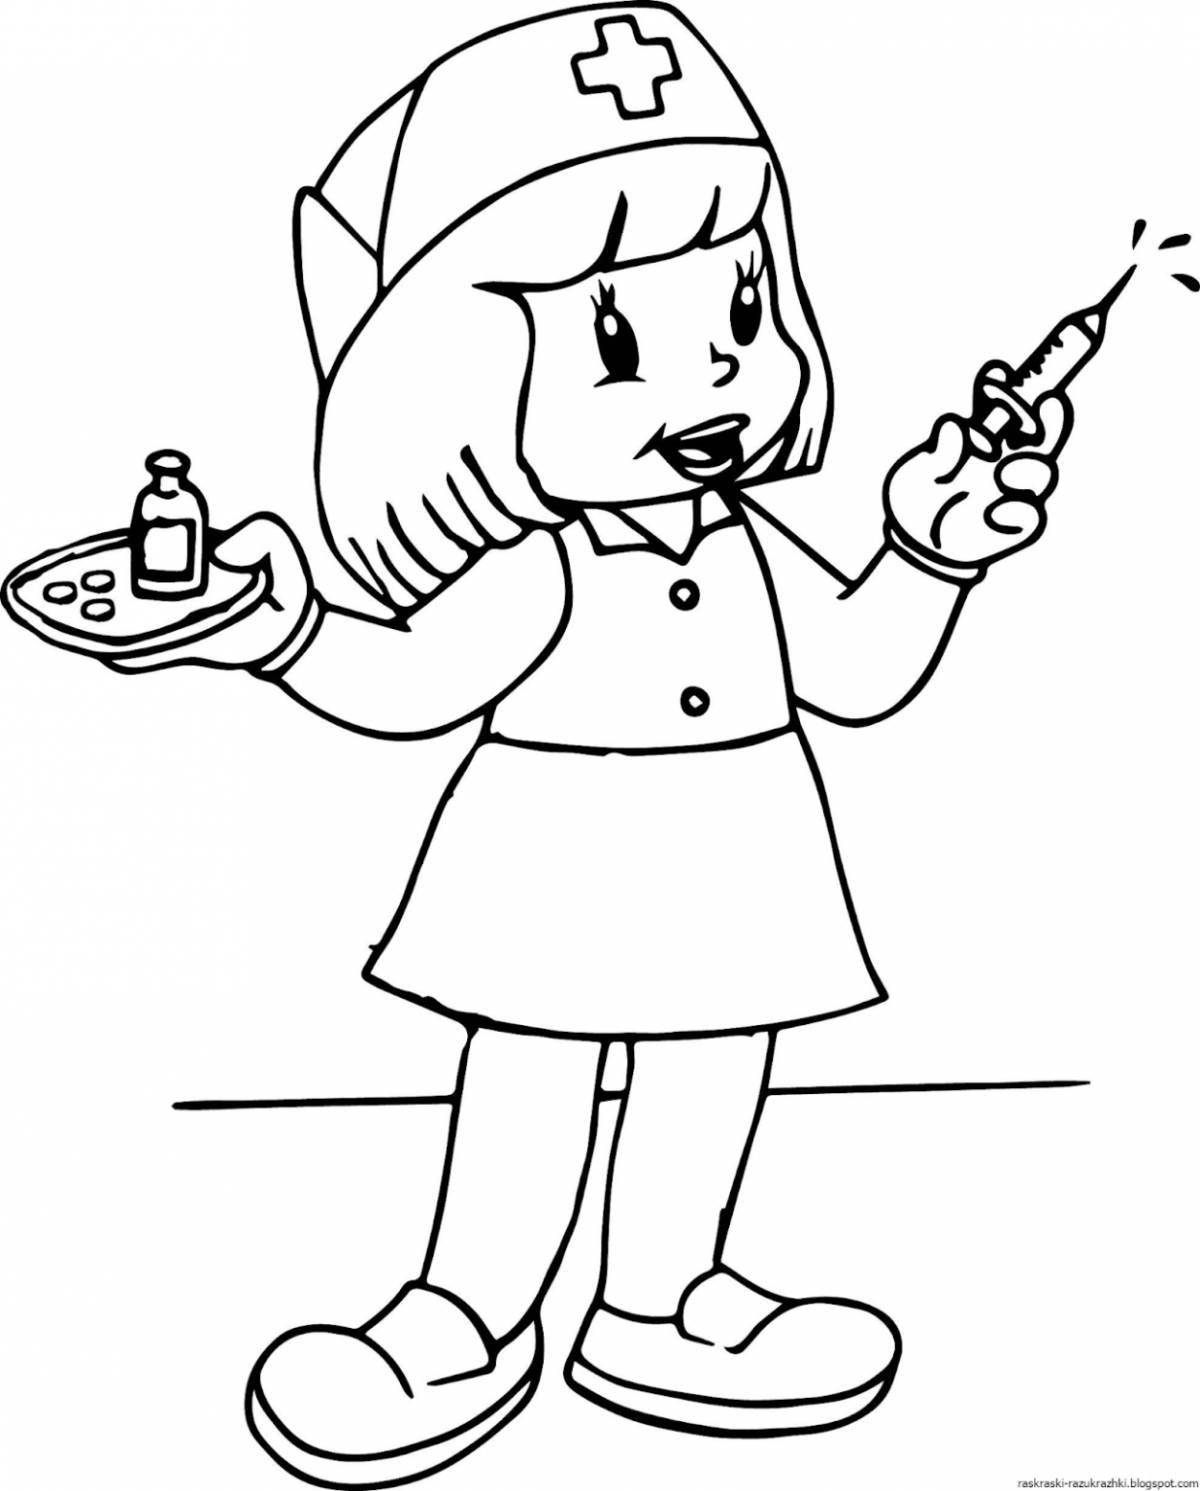 Charming military nurse coloring book